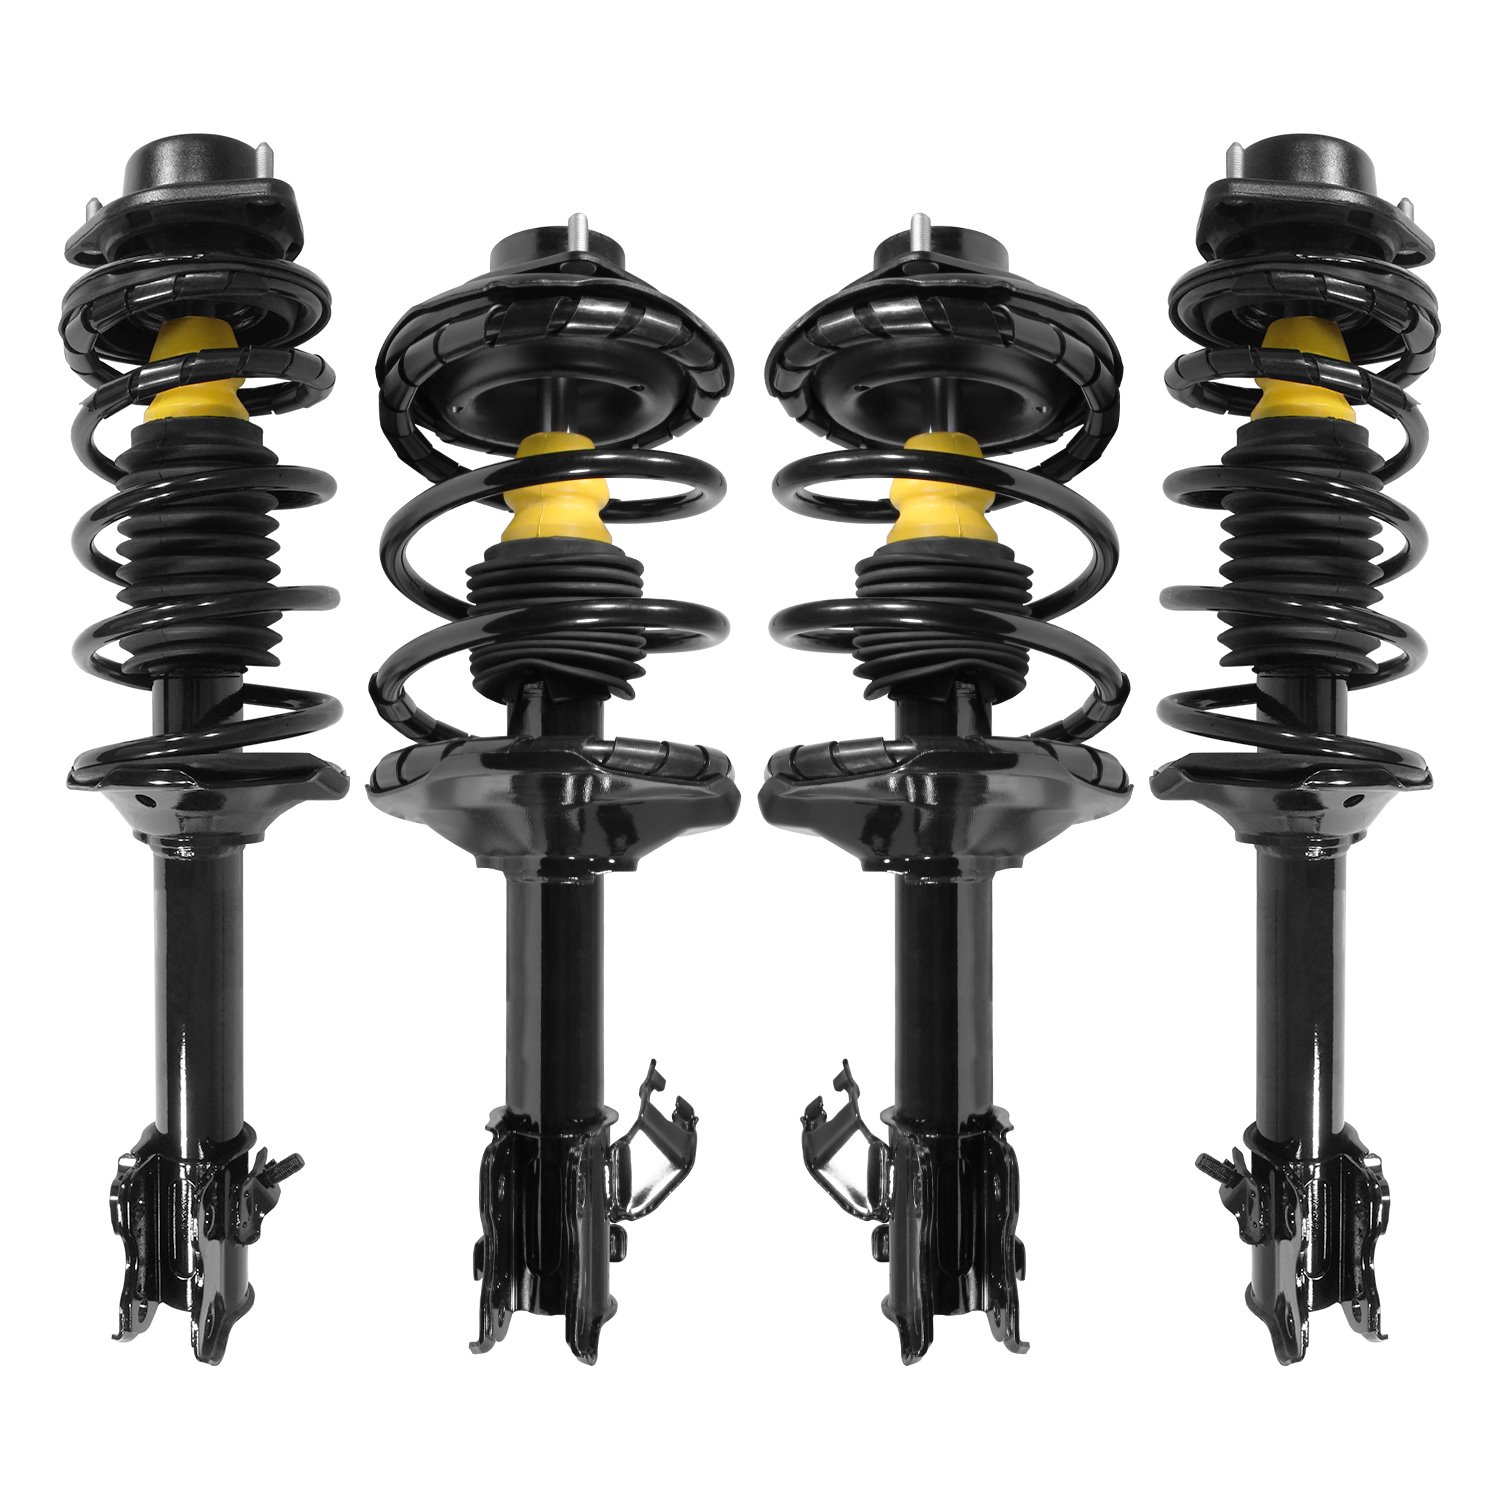 4-11753-15121-001 Front & Rear Suspension Strut & Coil Spring Assembly Kit Fits Select Nissan Altima